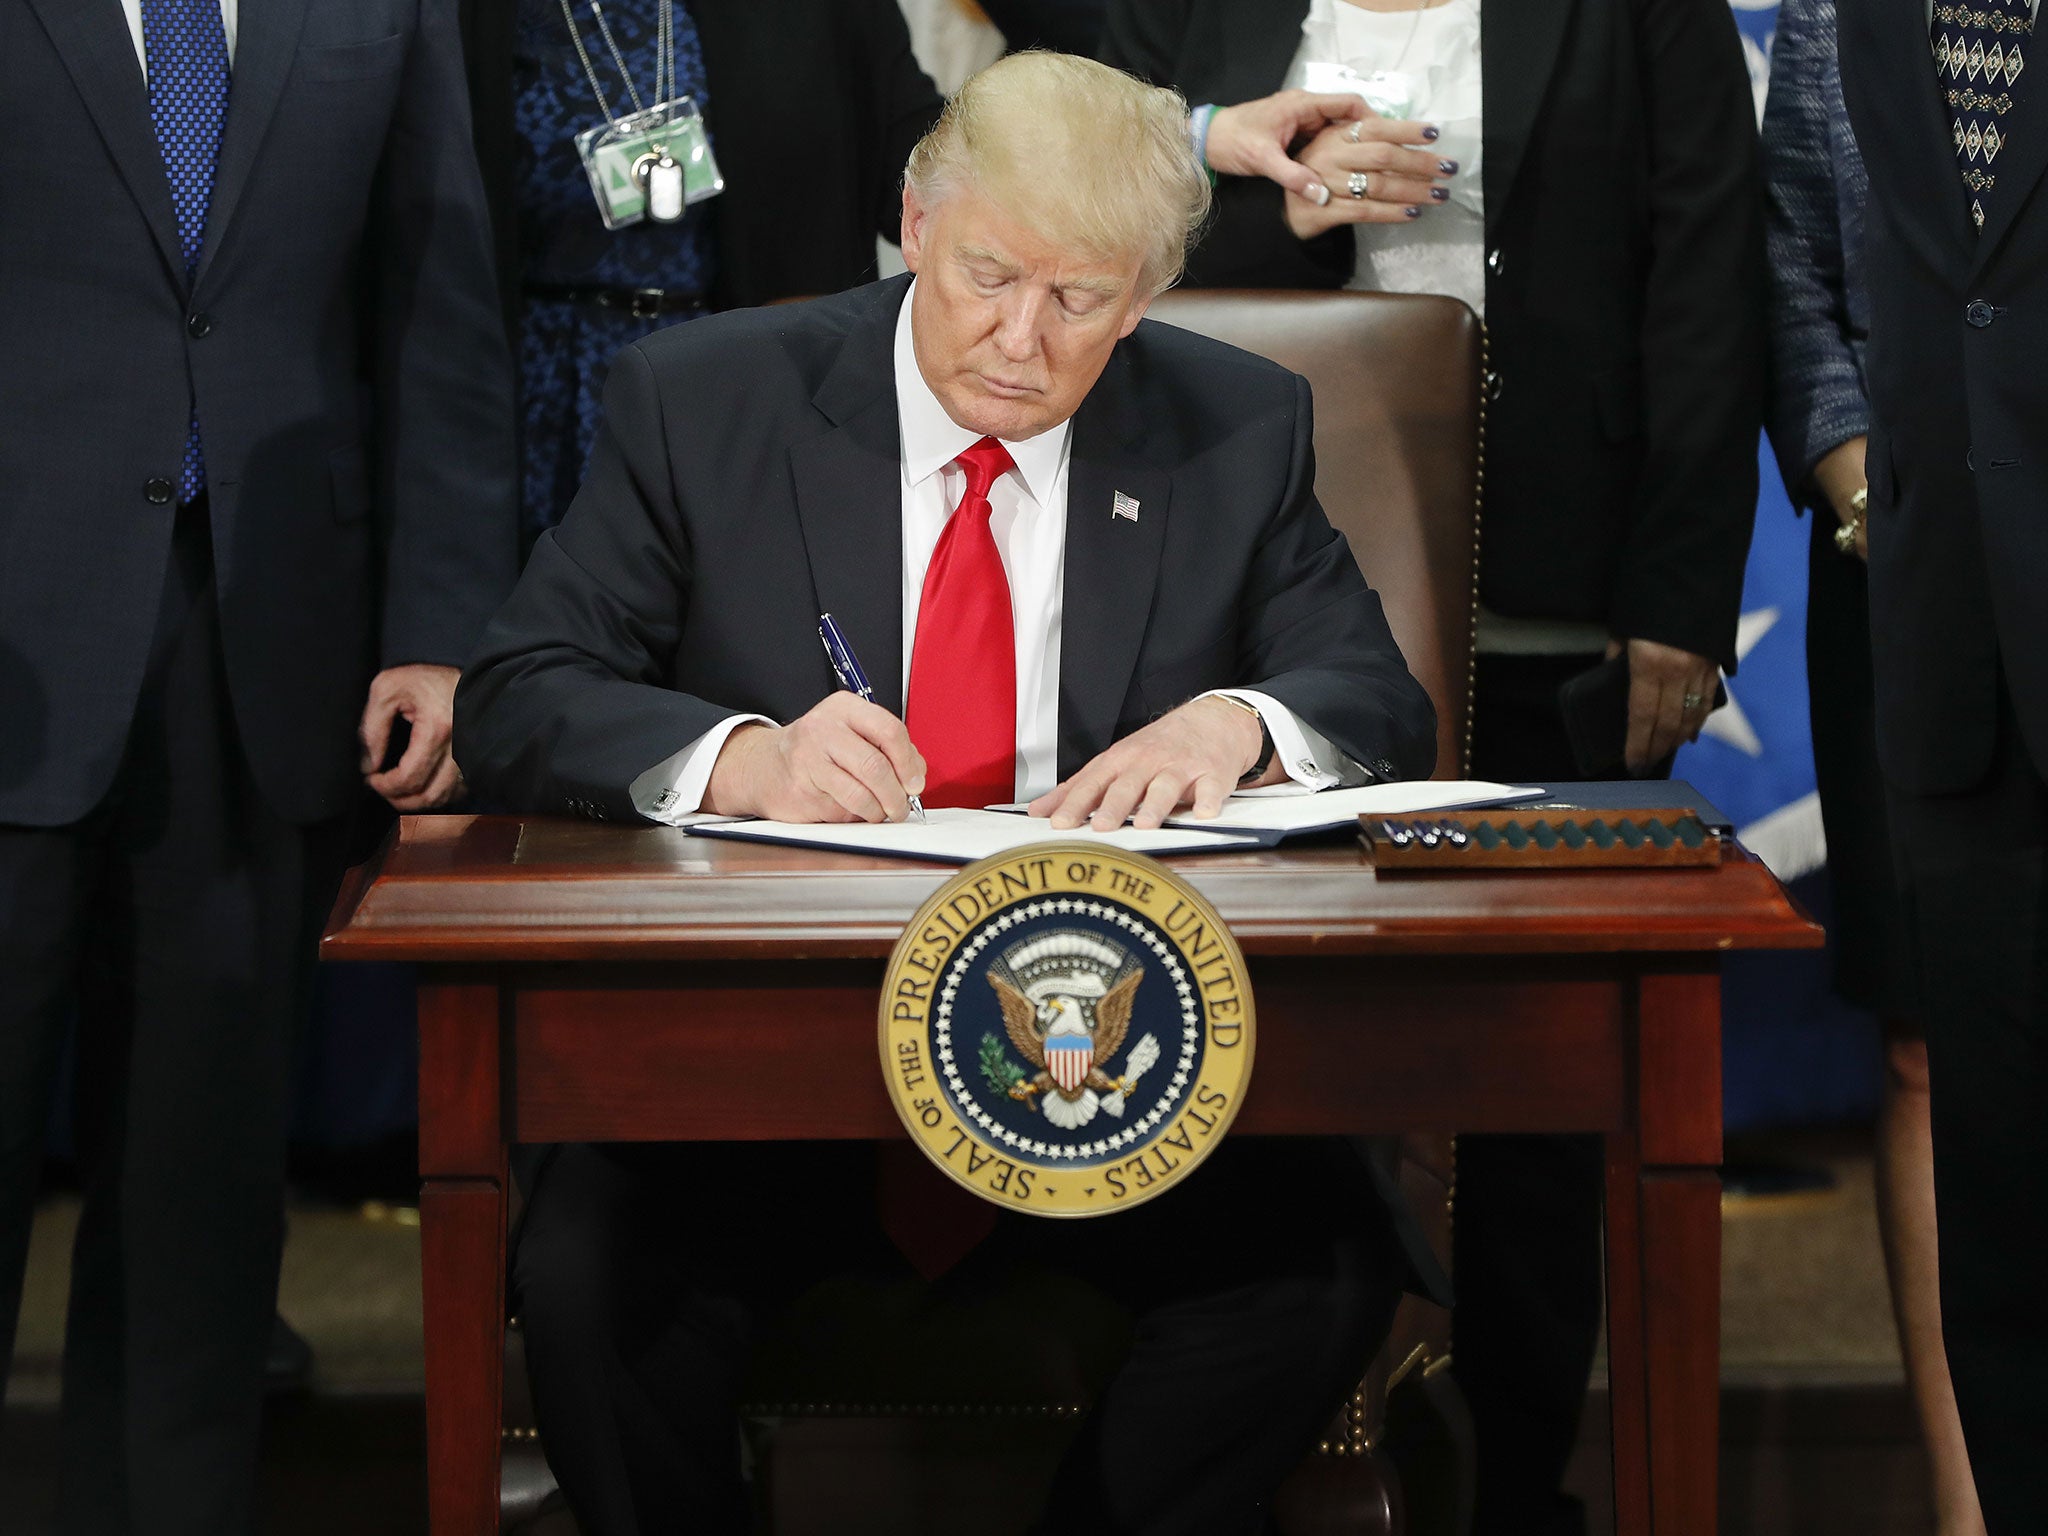 On 25 January 2017, President Donald Trump signed an executive order for border security and immigration enforcement improvements at the Department of Homeland Security